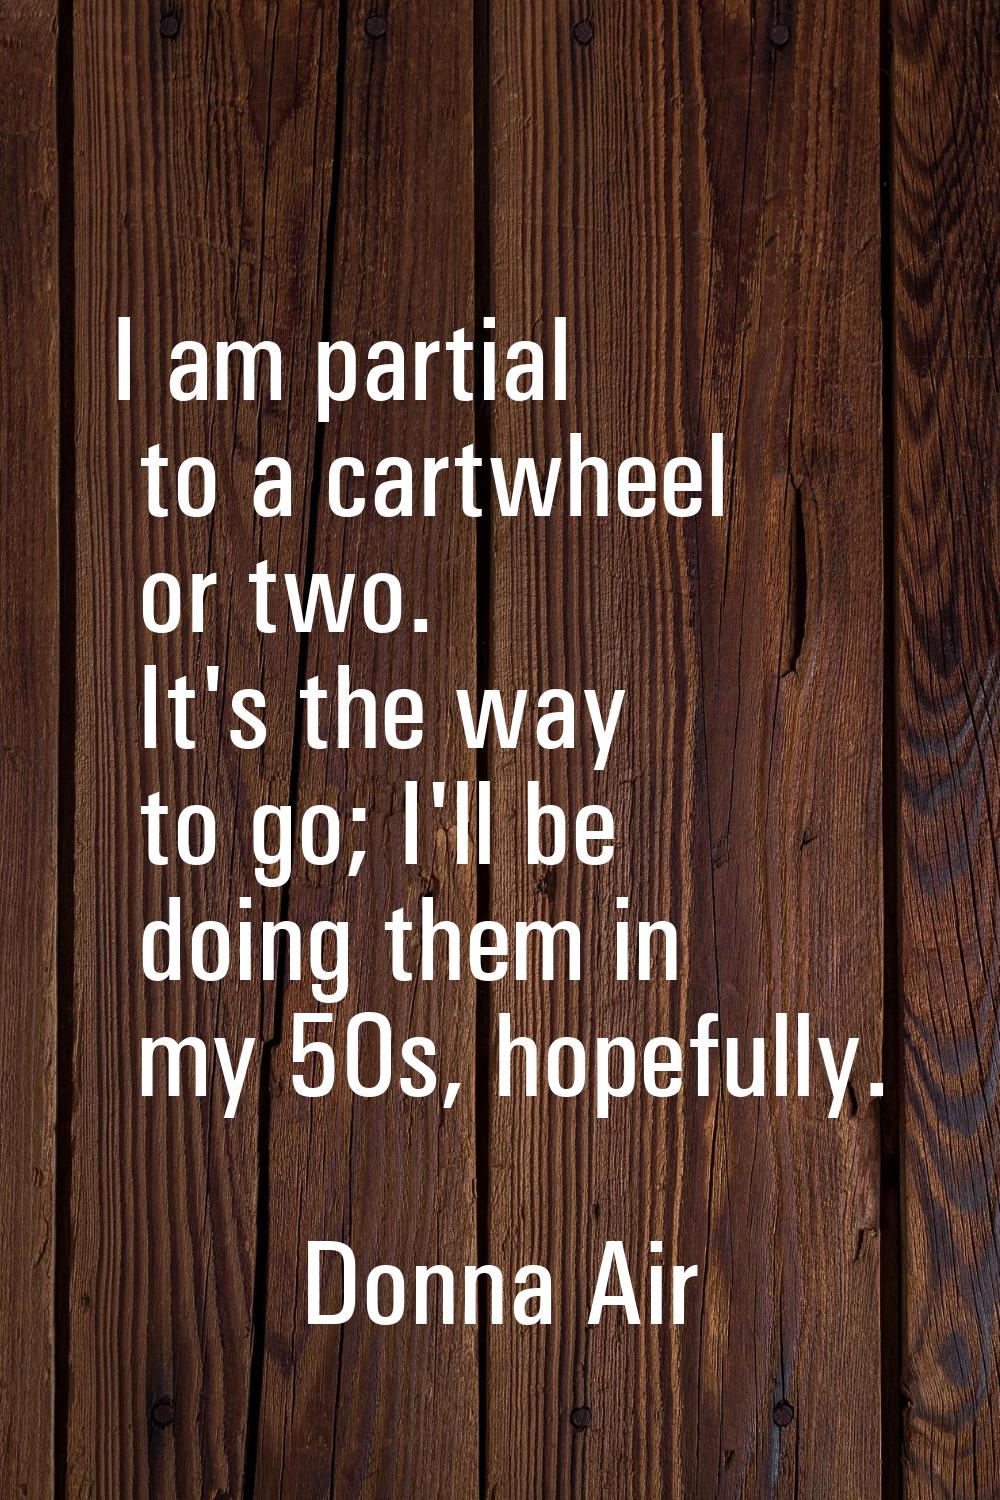 I am partial to a cartwheel or two. It's the way to go; I'll be doing them in my 50s, hopefully.